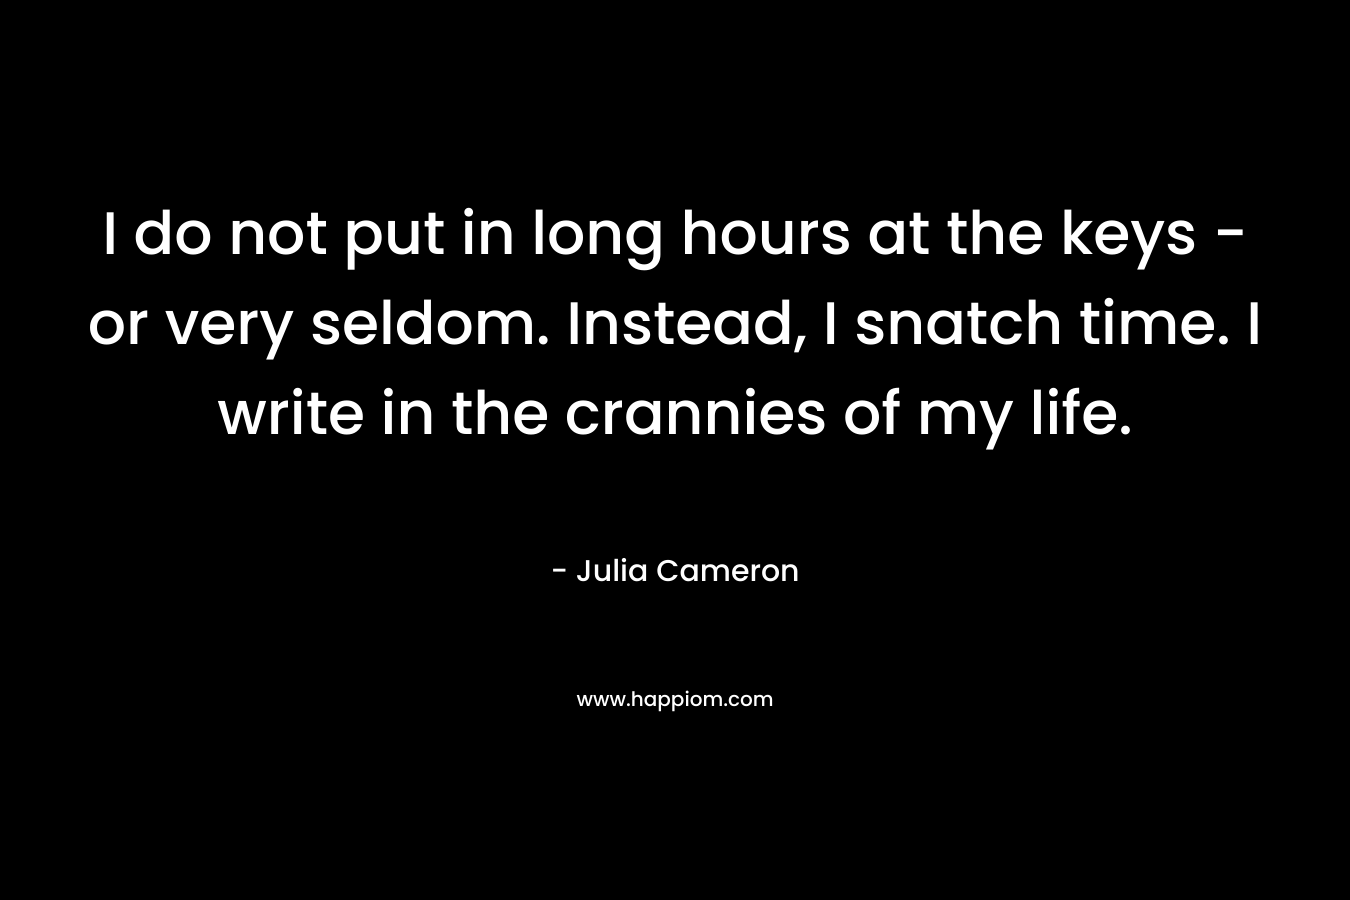 I do not put in long hours at the keys - or very seldom. Instead, I snatch time. I write in the crannies of my life.